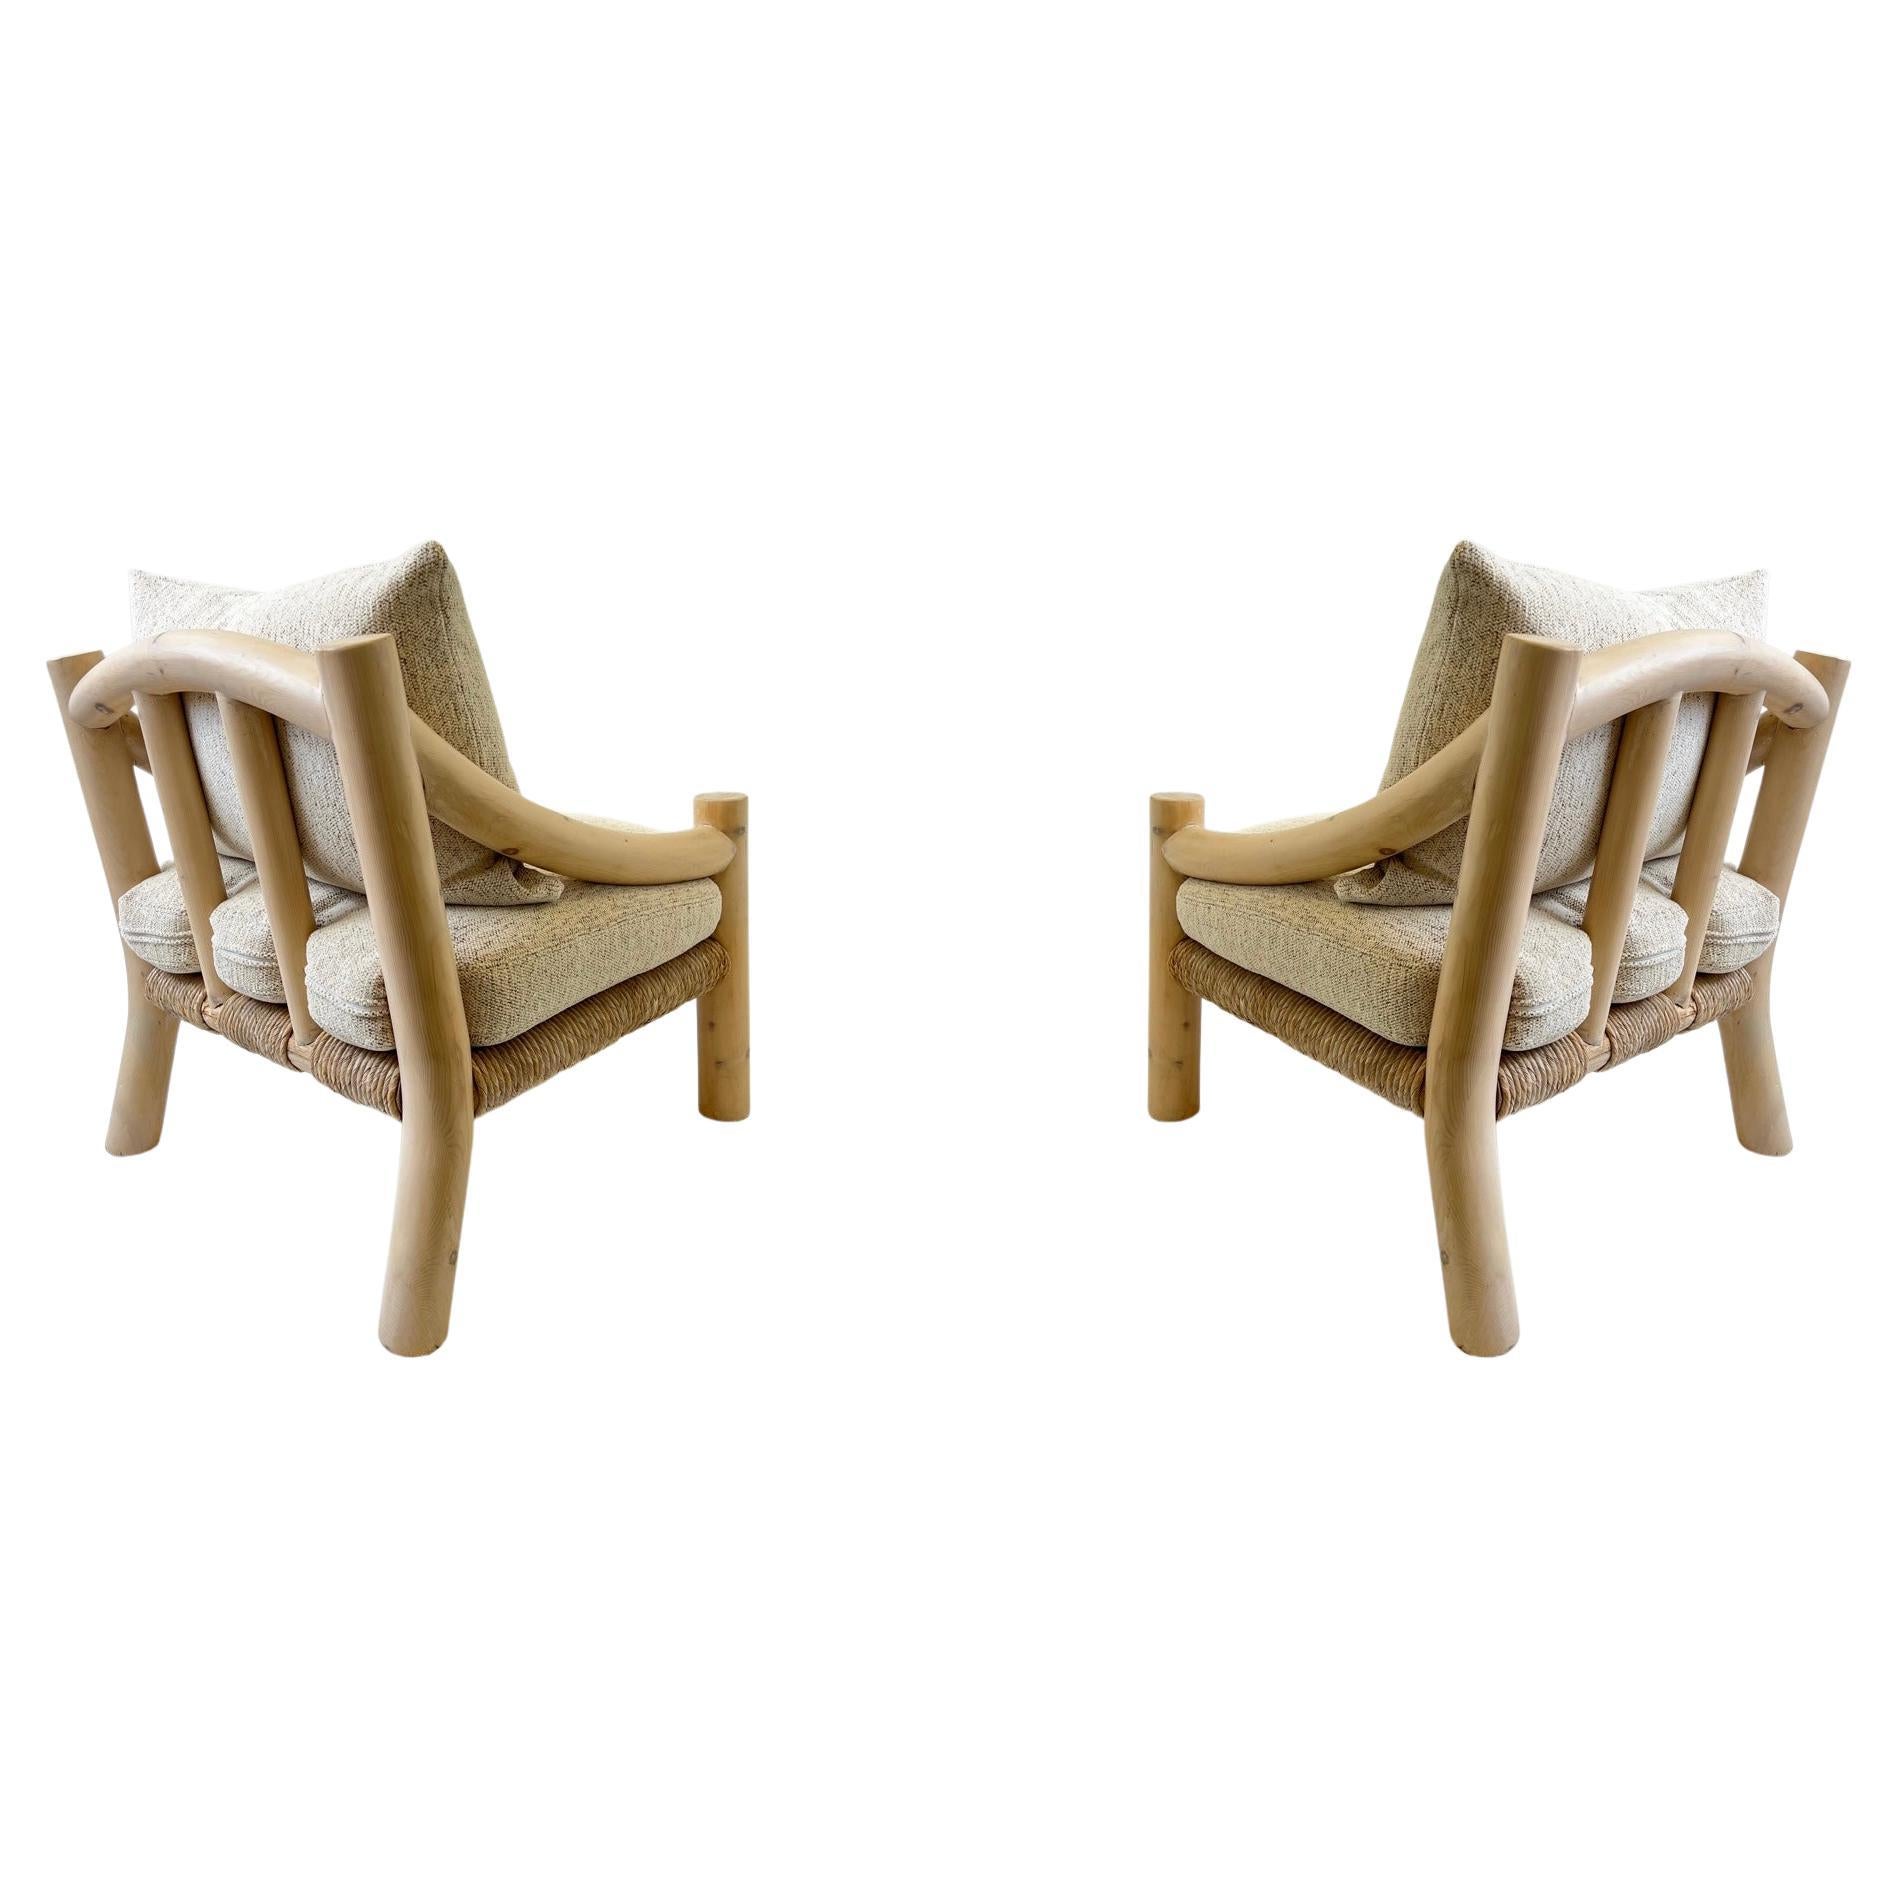 Pair of White Wash Lounge Chairs by Michael Taylor